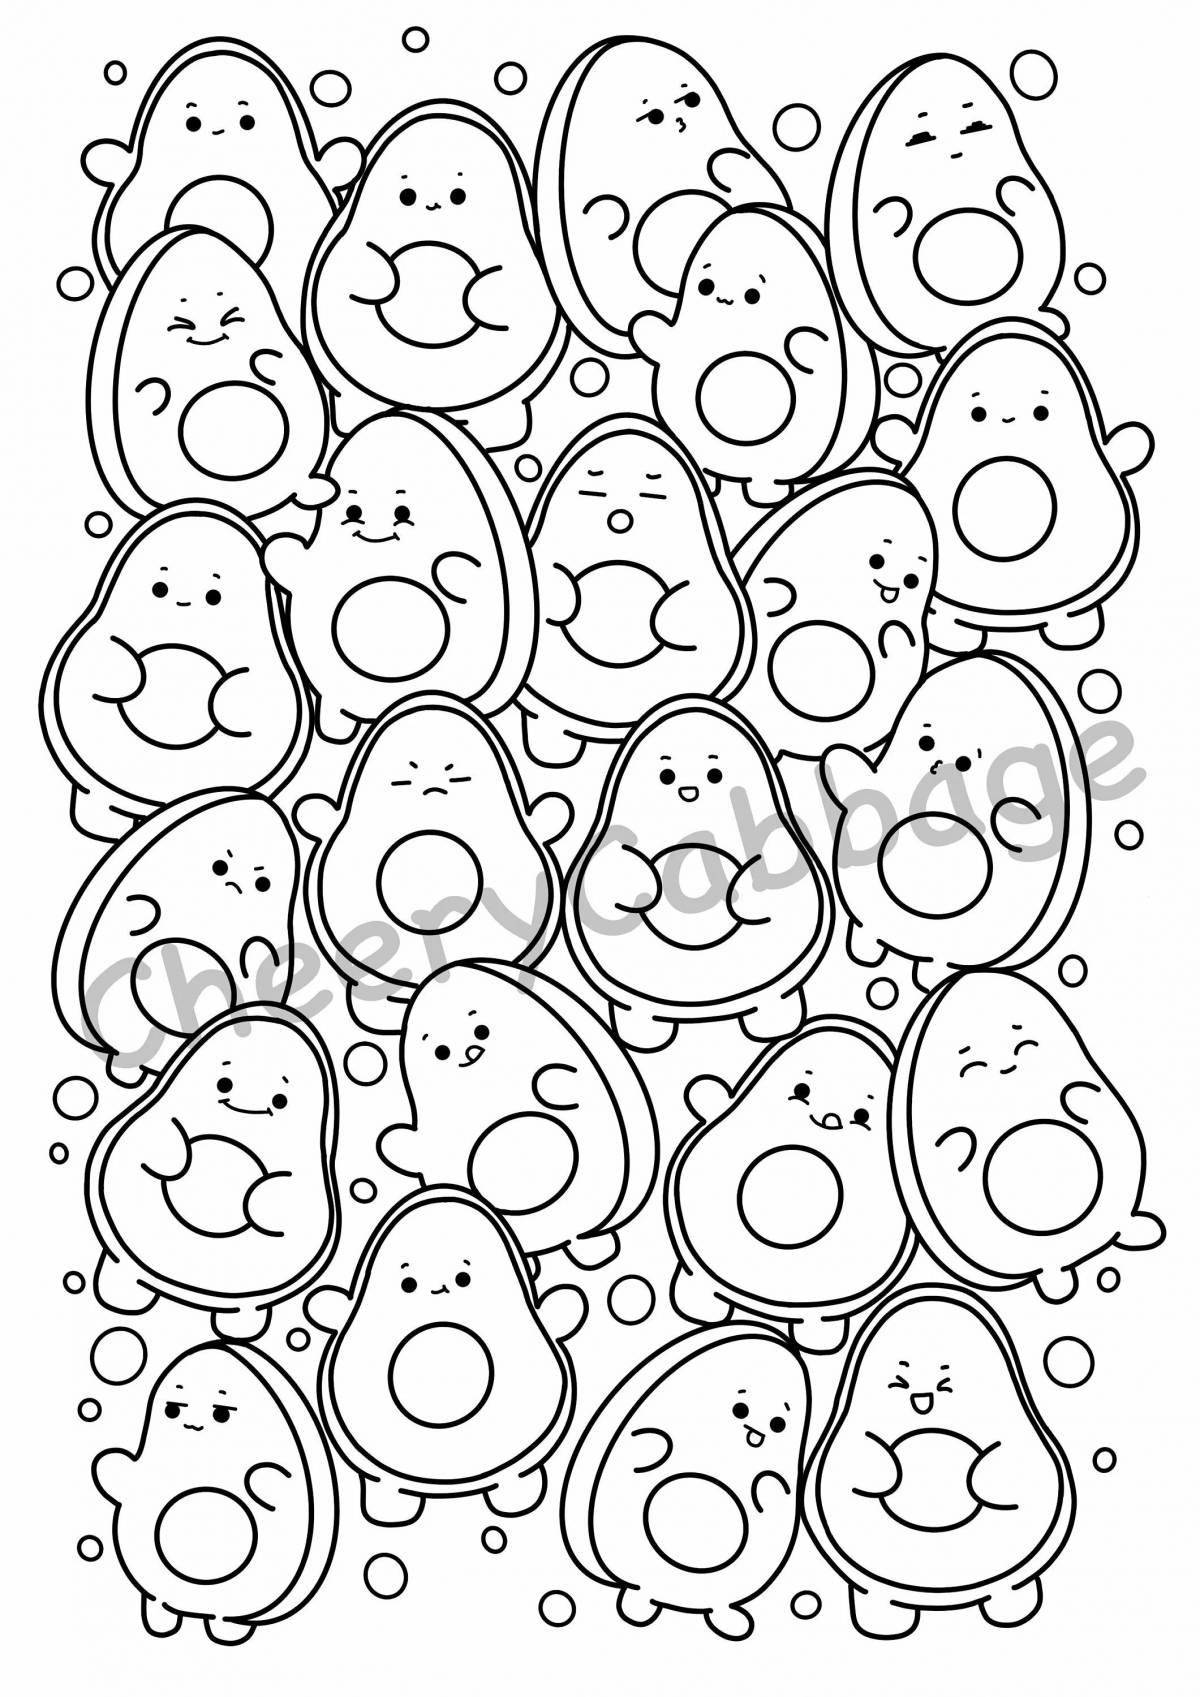 An interesting avocado coloring page for 6-7 year olds